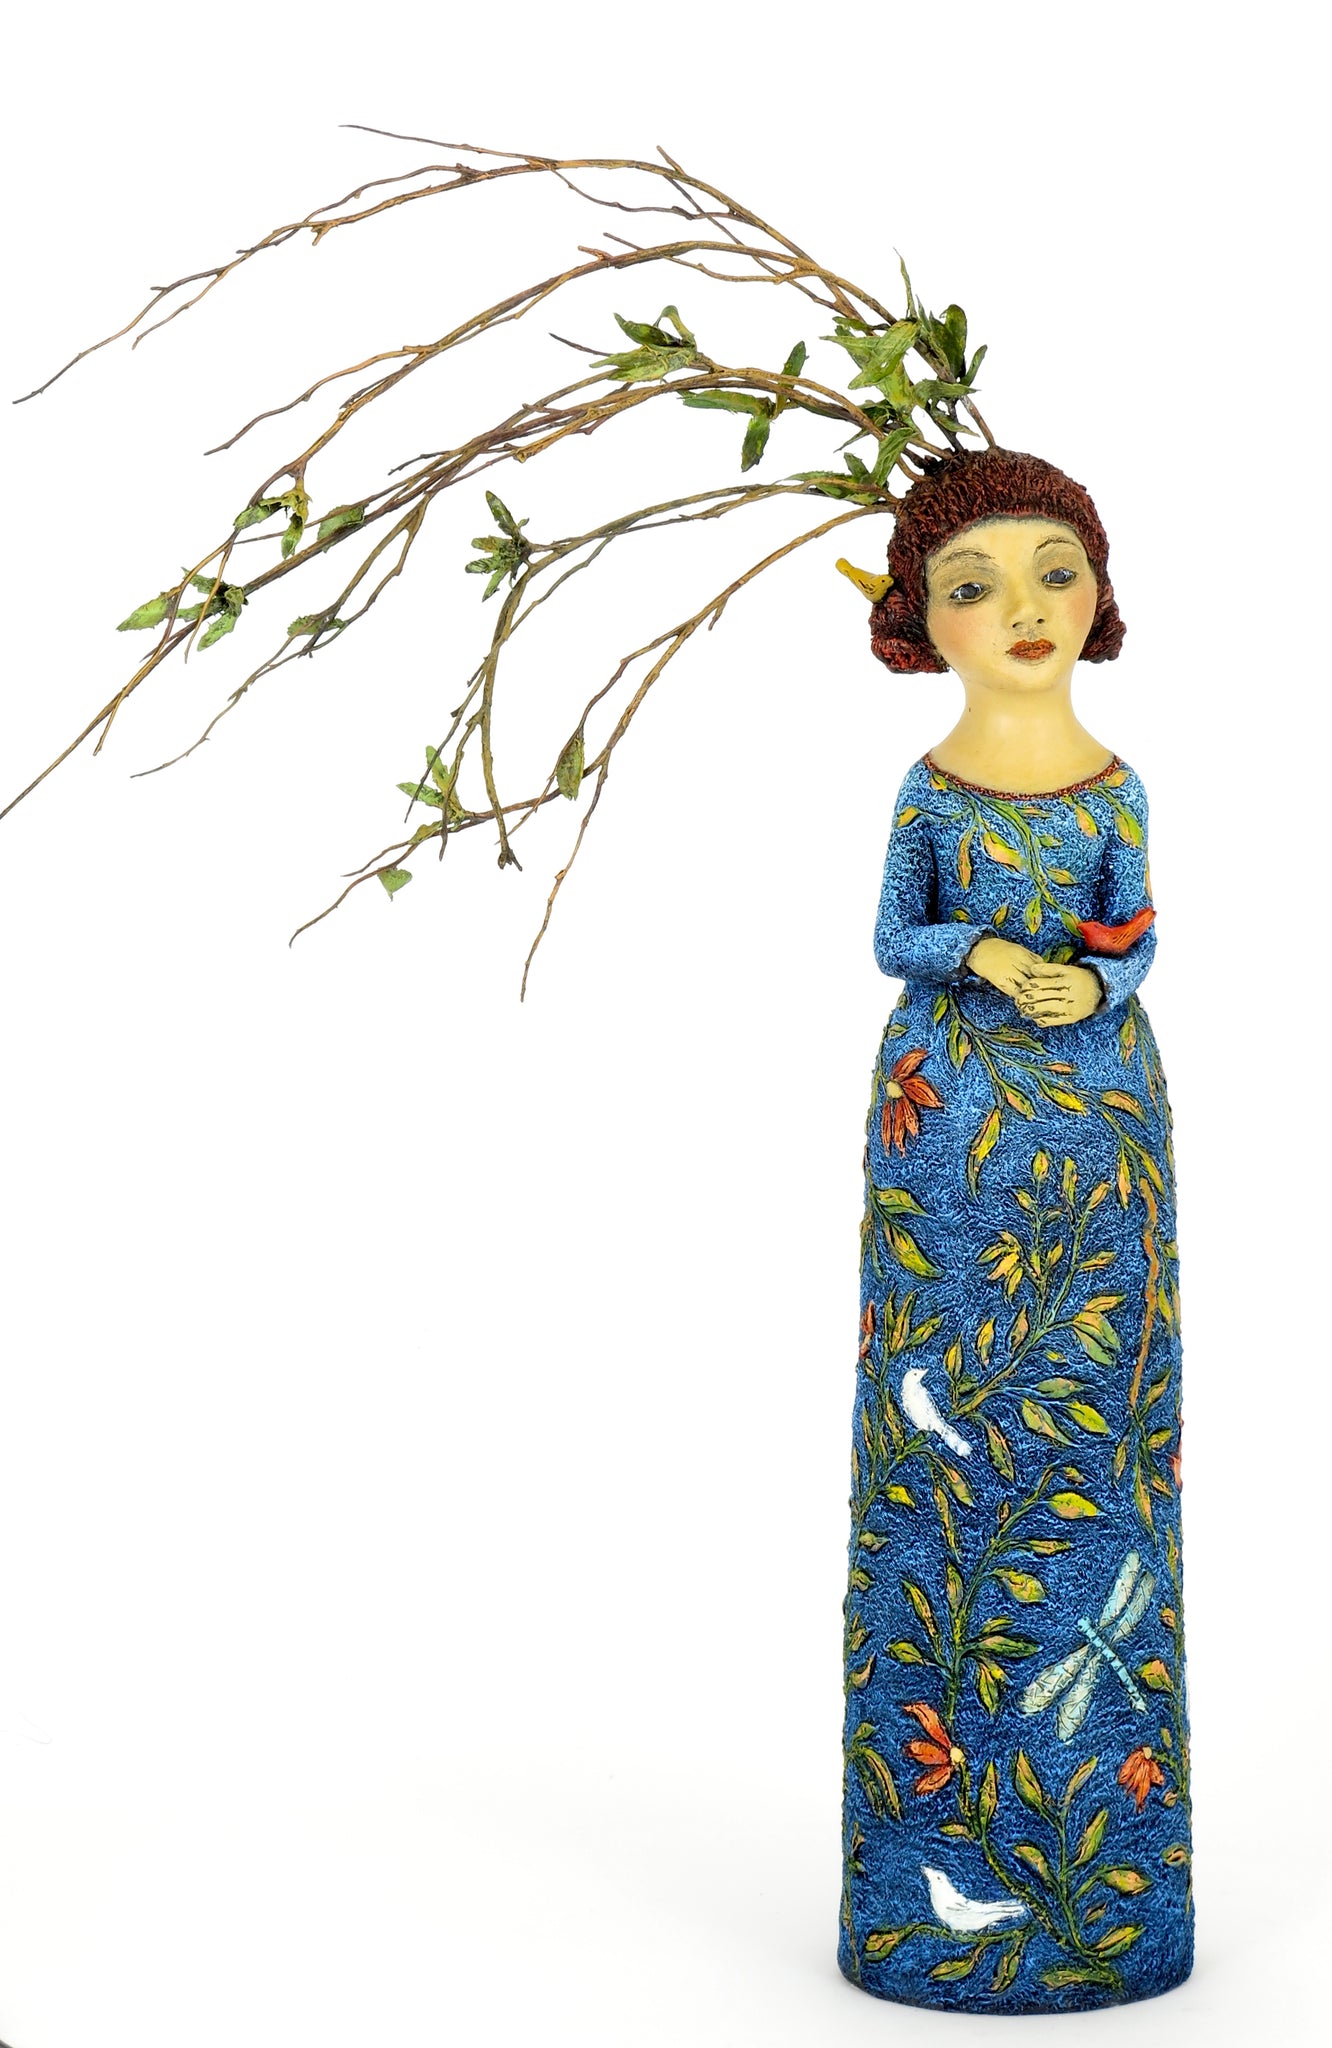 SOLD   "Gown of Blue Sky and Solitude" Original ceramic sculpture by Jacquline Hurlbert